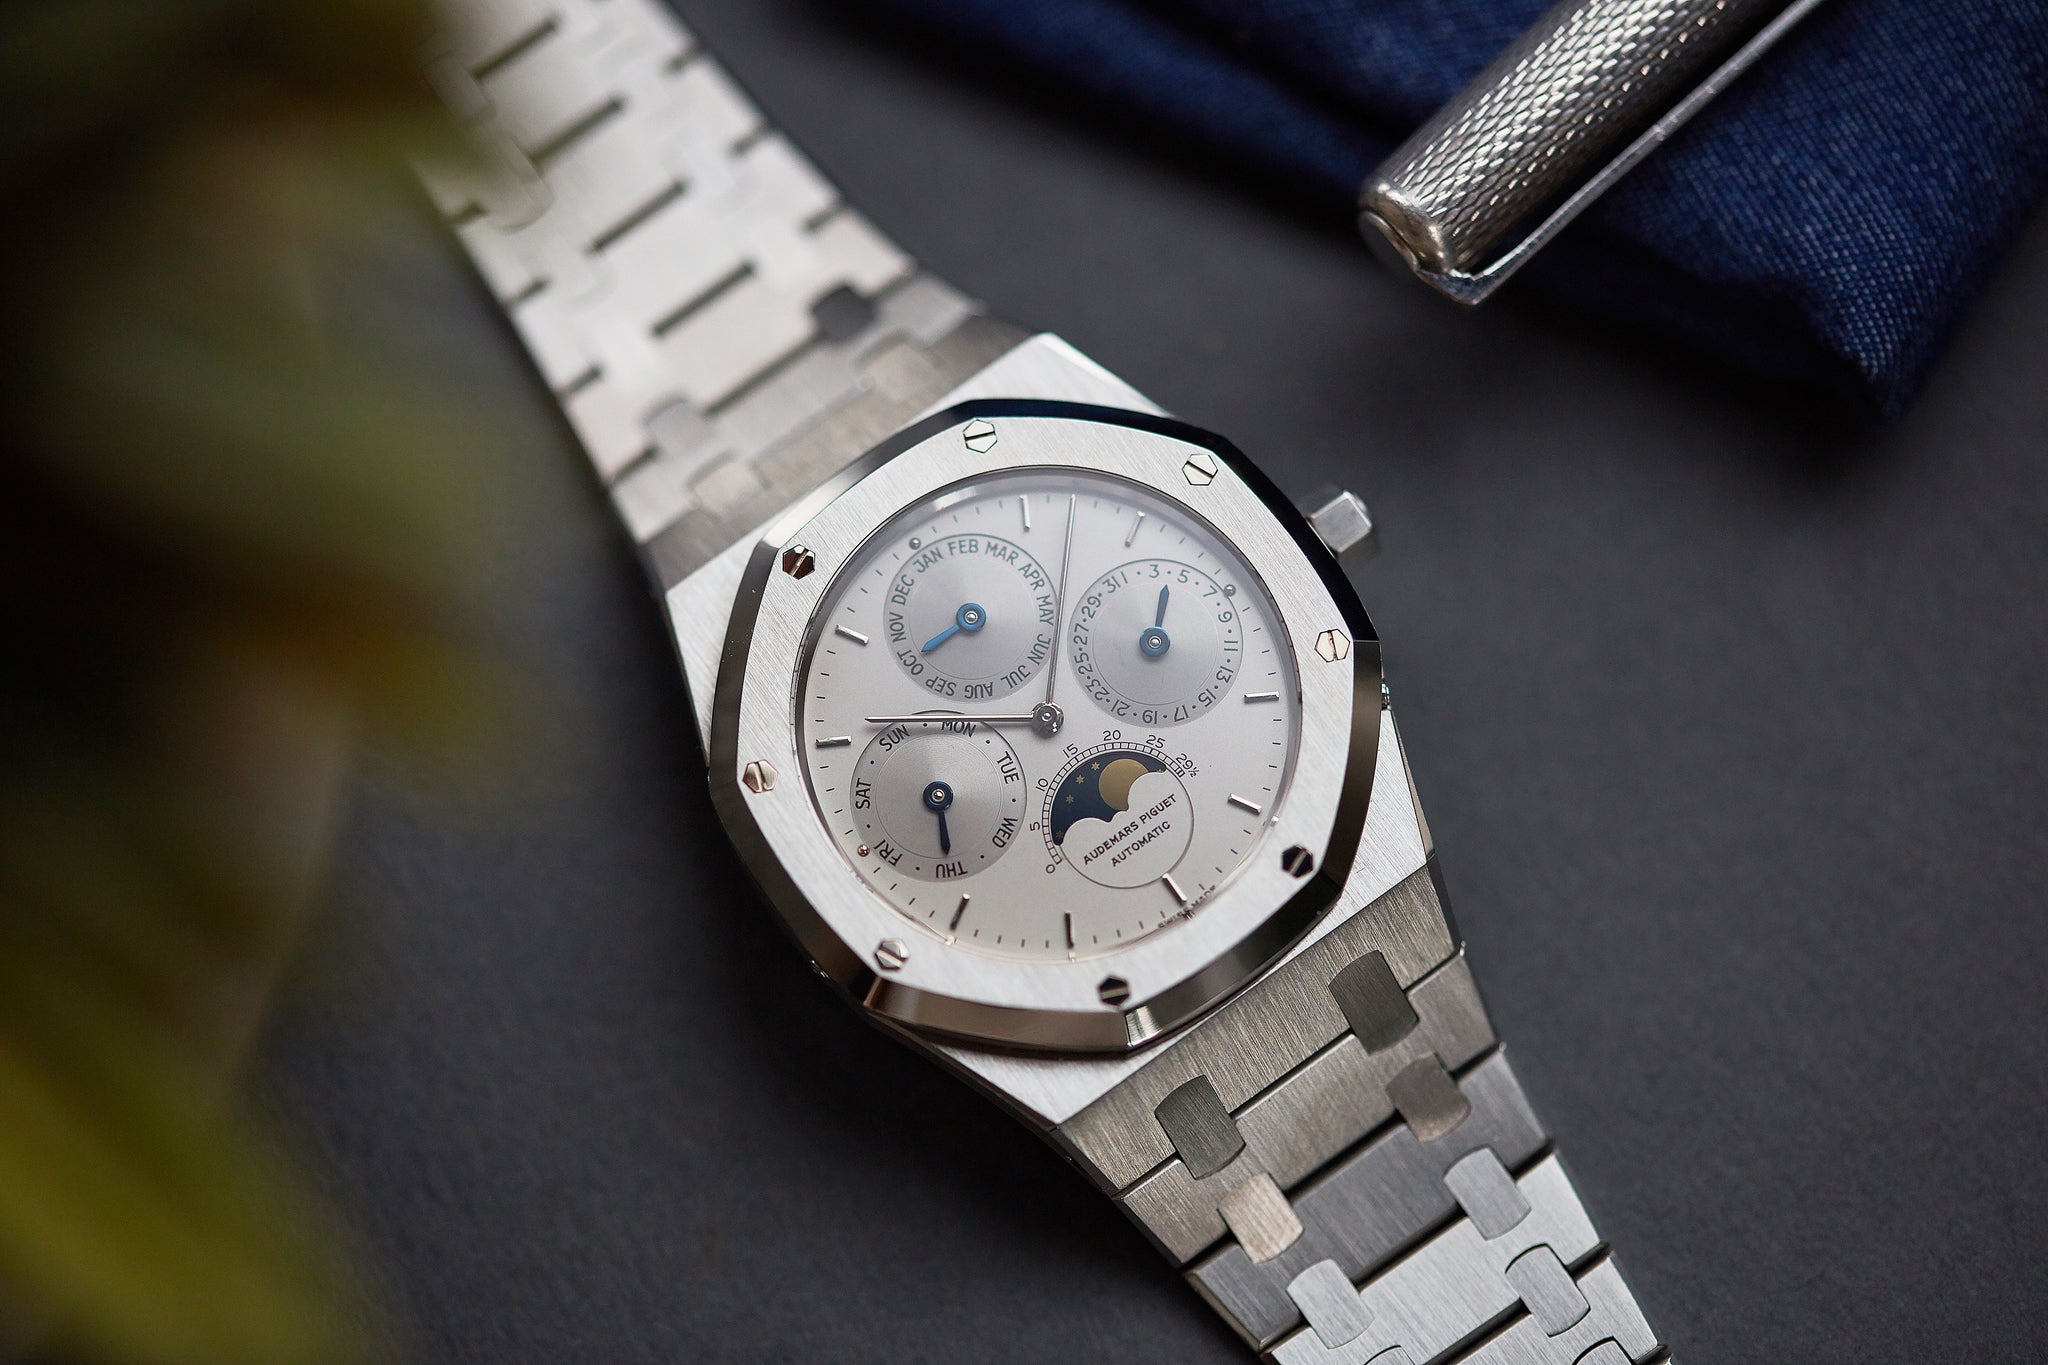 Audemars Piguet Royal Oak 25654ST vintage watch for sale online at A Collected Man London UK specialist of rare watches